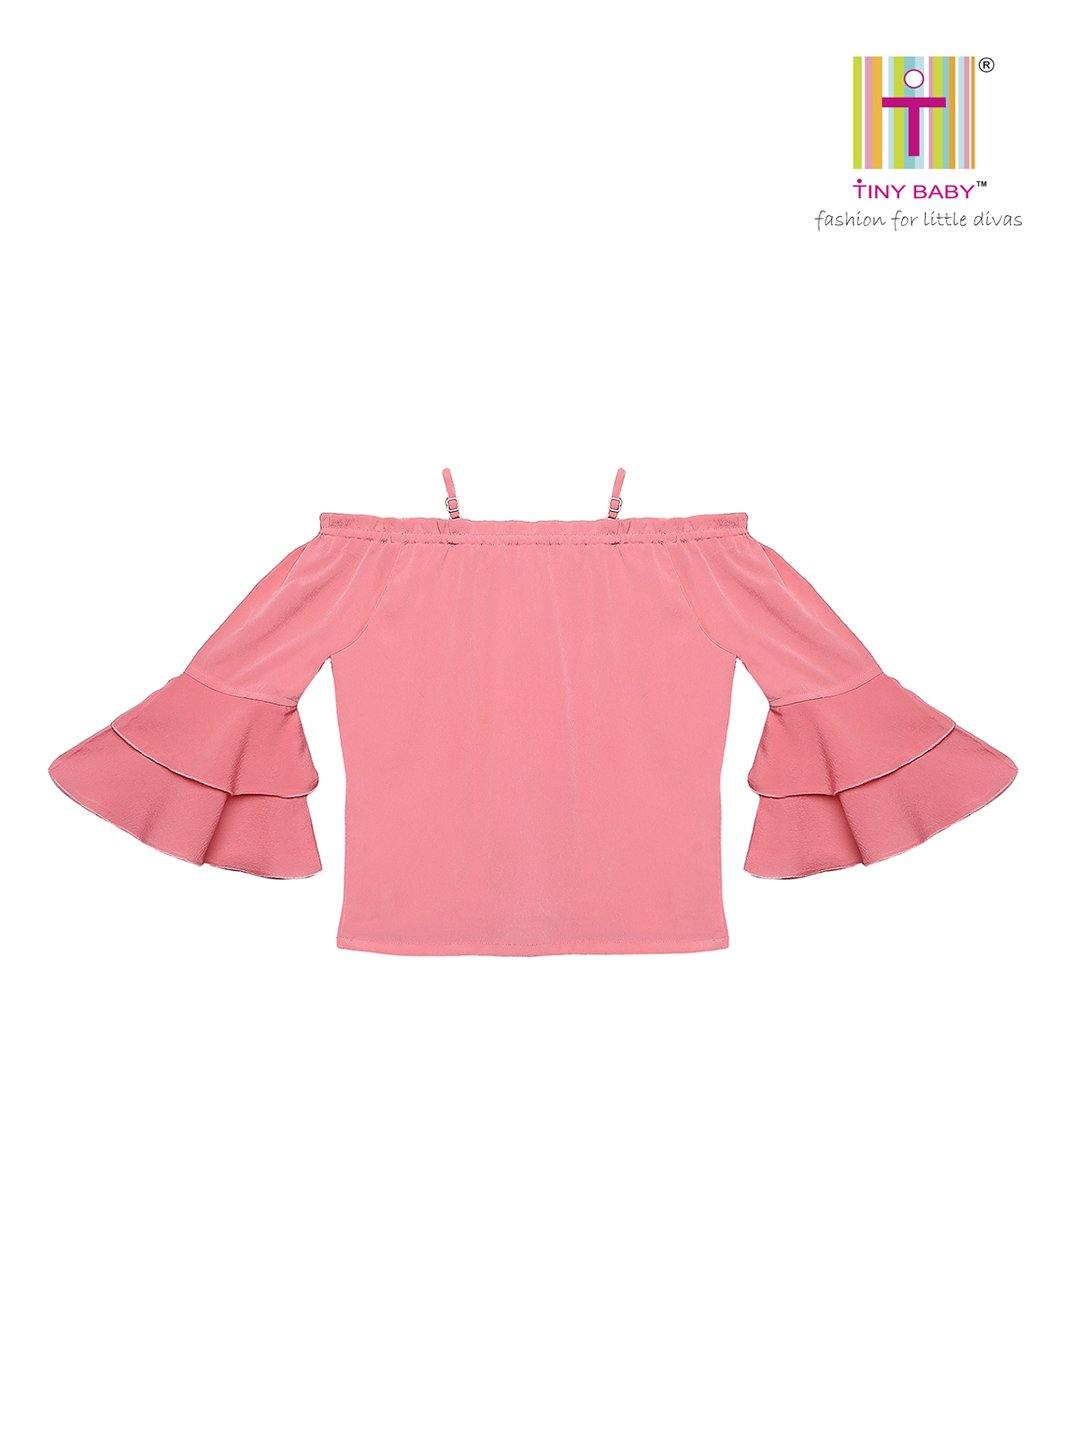 Tiny Baby Pink Colored Top - TINY BABY INDIA shop.tinybaby.in